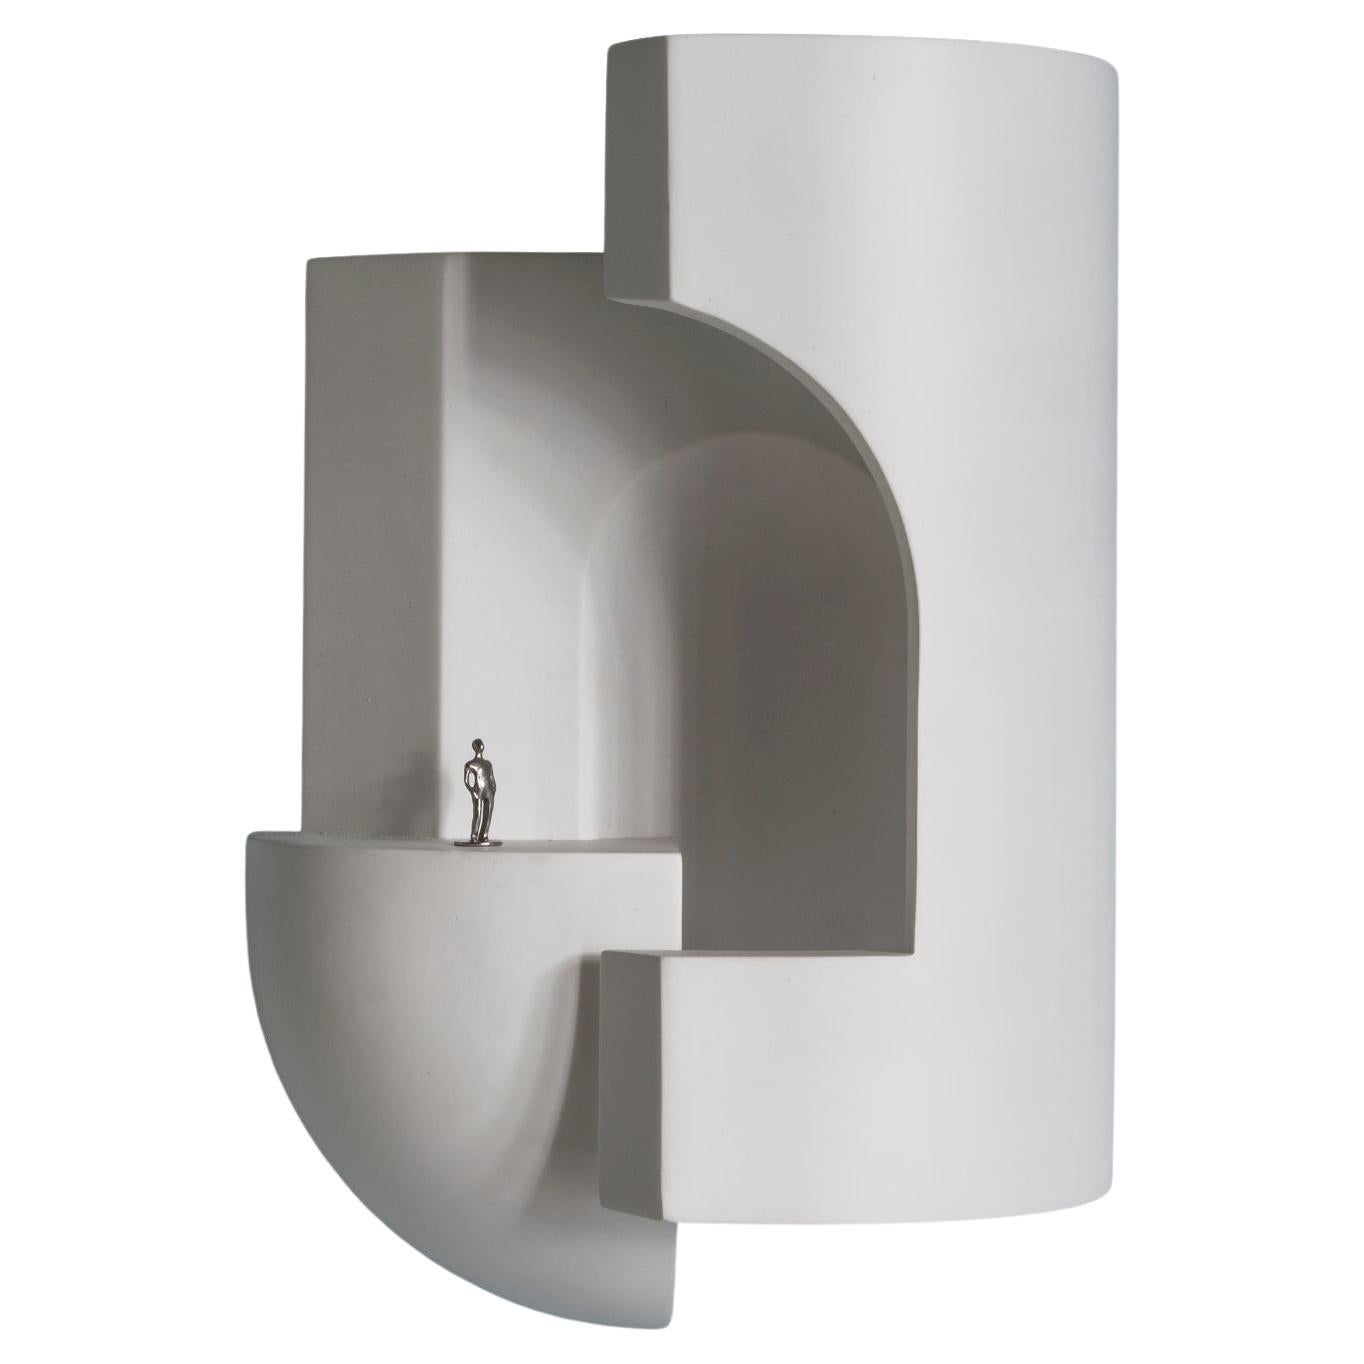 DCW Editions Soul Story 2 Wall Lamp in White Plaster by Charles Kalpakian For Sale